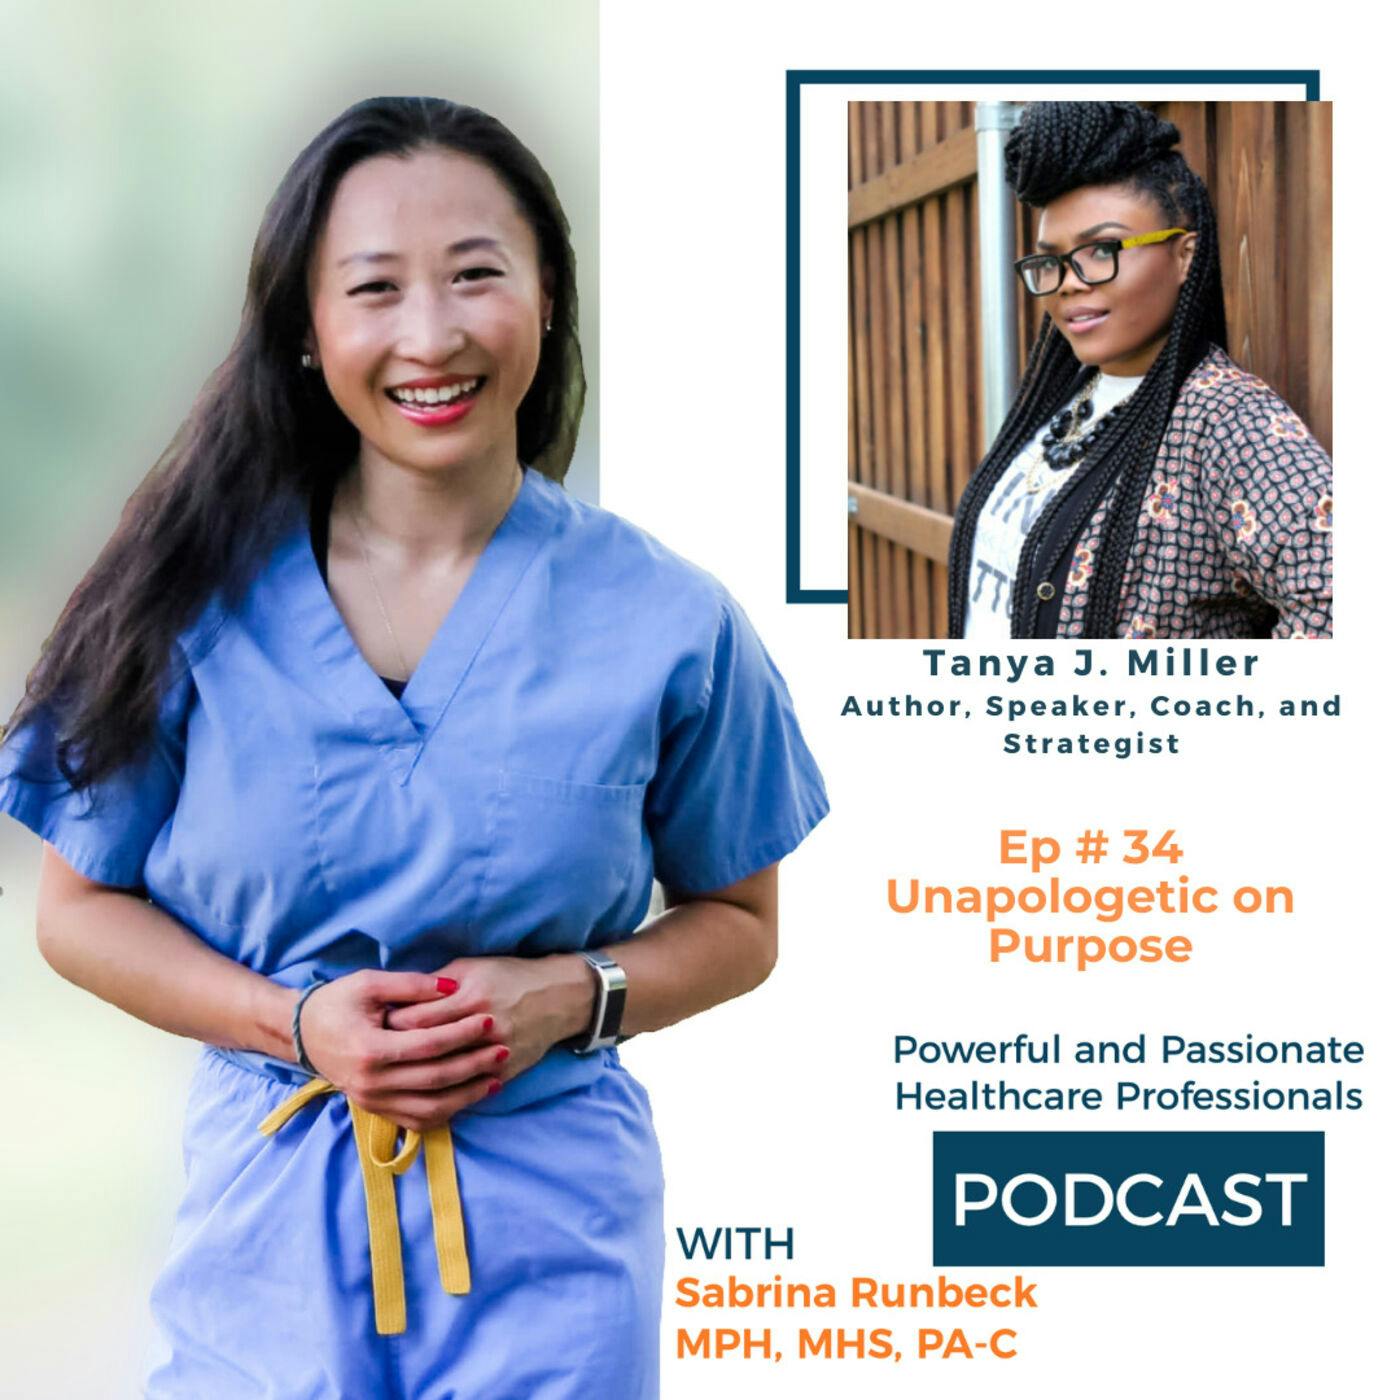 Ep 34 – Unapologetic on purpose with Tanya J. Miller